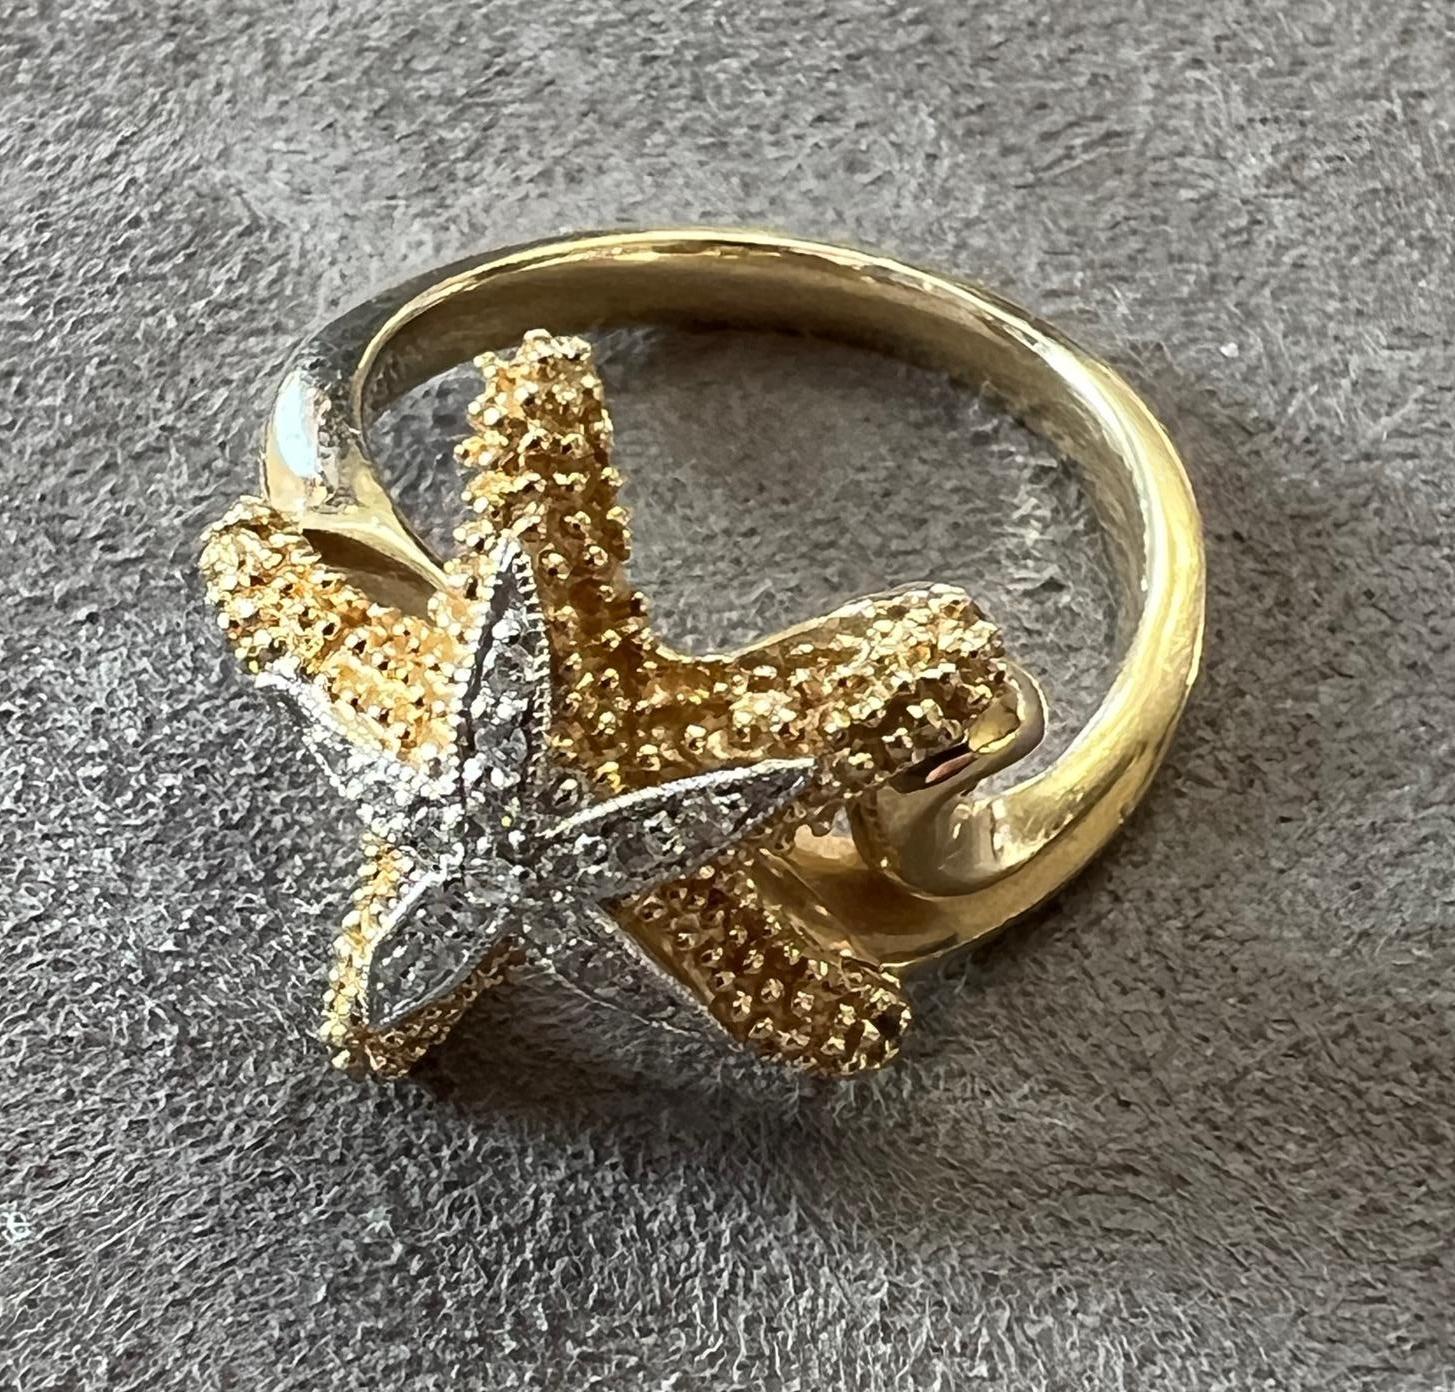 This is an ocean-inspired 14k 18mm starfish ring finely handcrafted by Denny Wong featuring sixteen glittering diamonds. 

Gold: 14k yellow gold

Jewels: 16 diamonds totaling in 0.08 carats 

Size: 18mm

Award winning jewelry designer Denny Wong is